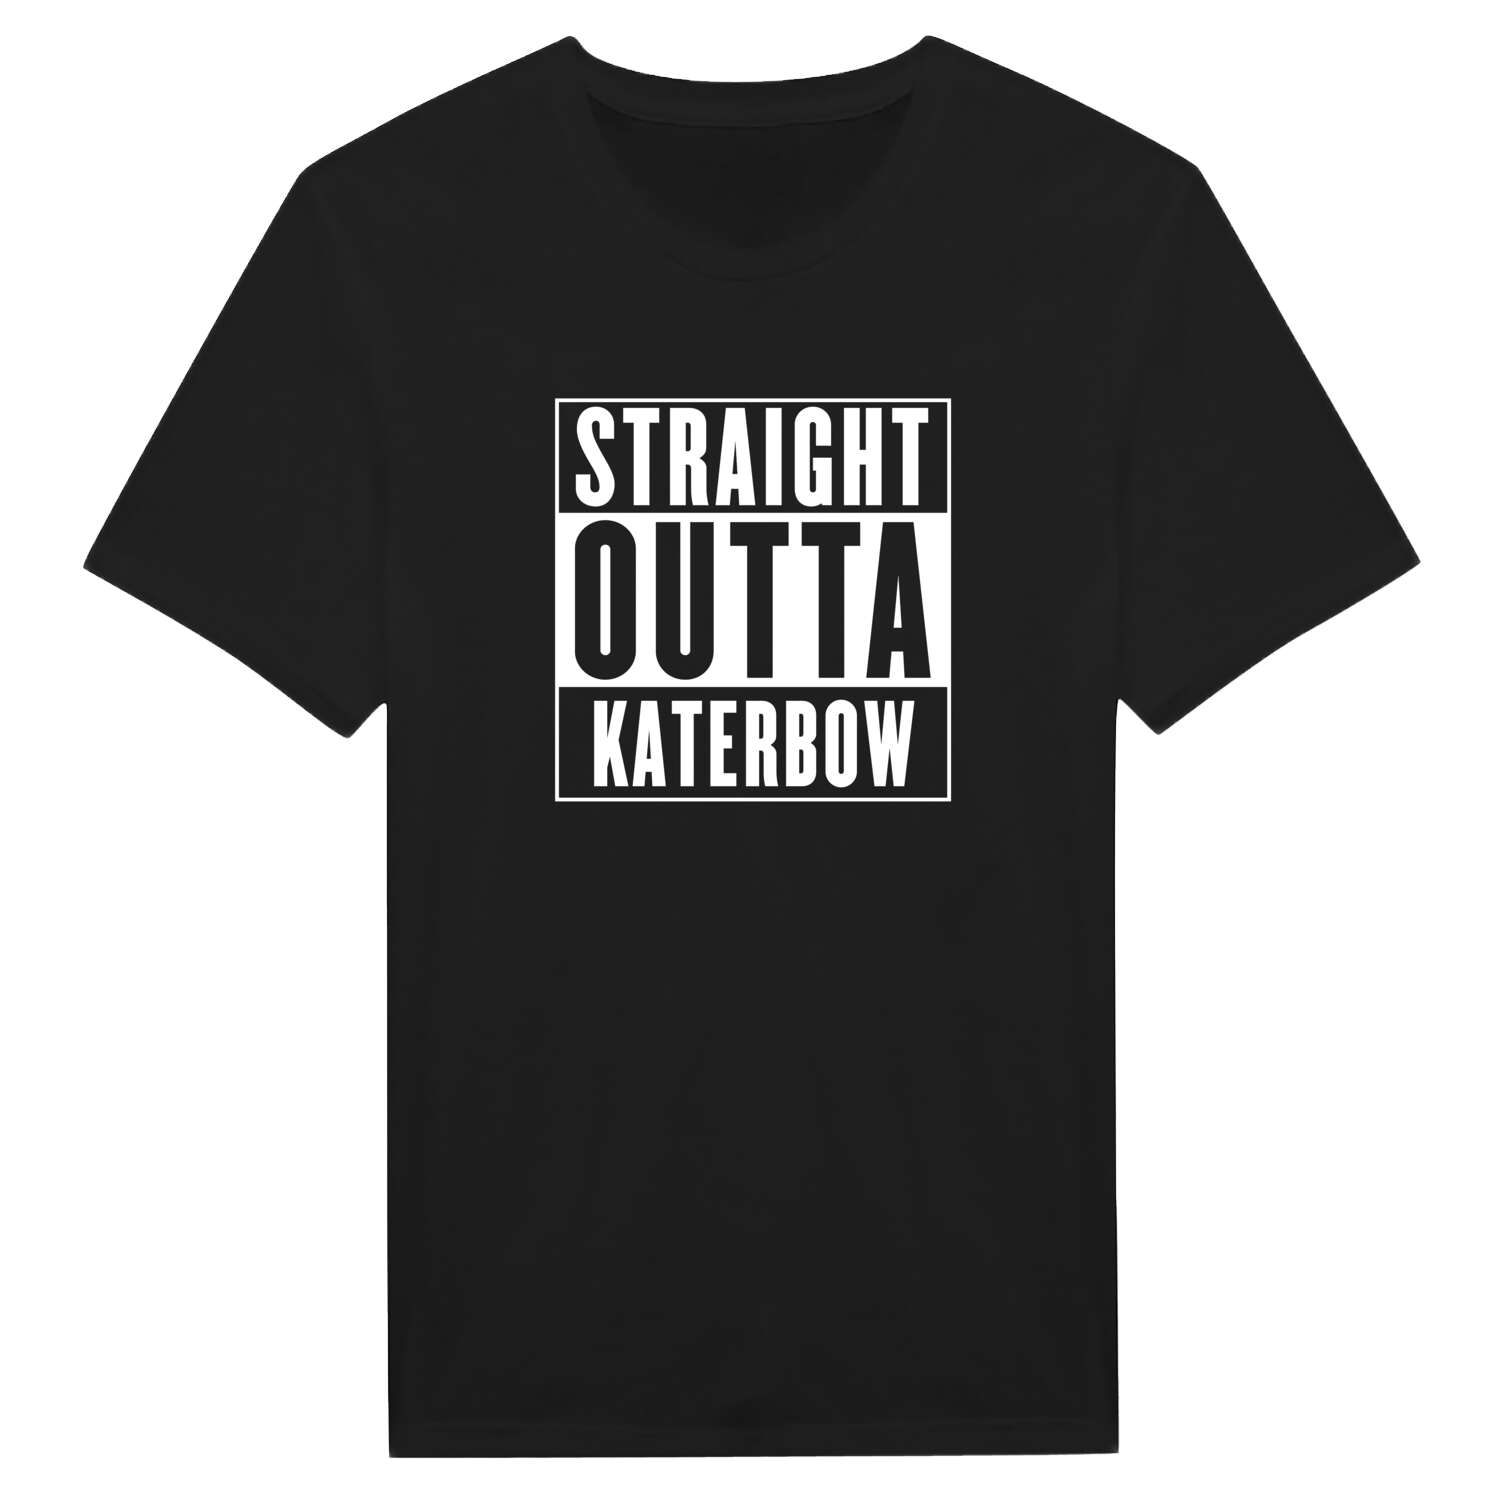 Katerbow T-Shirt »Straight Outta«